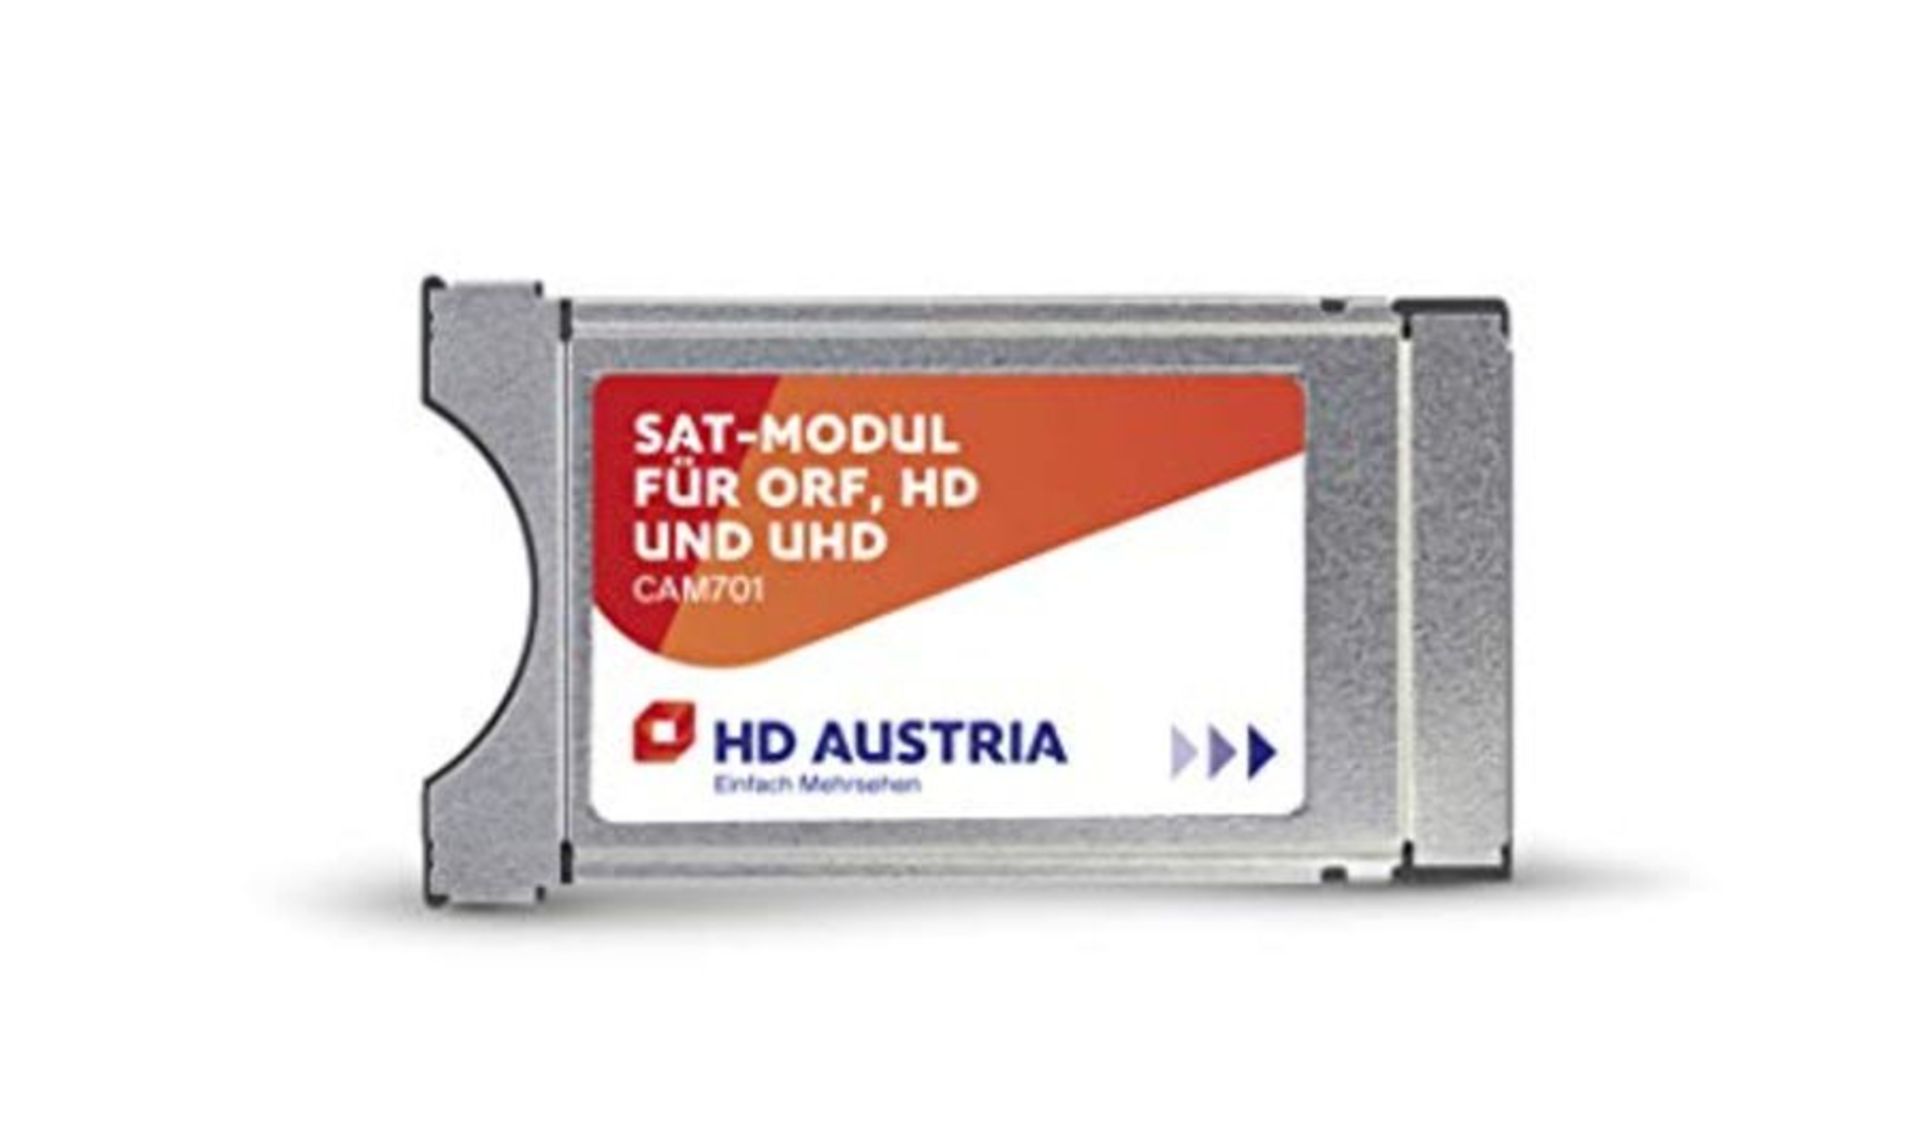 RRP £52.00 HD Austria SAT module for ORF, HD and UHD